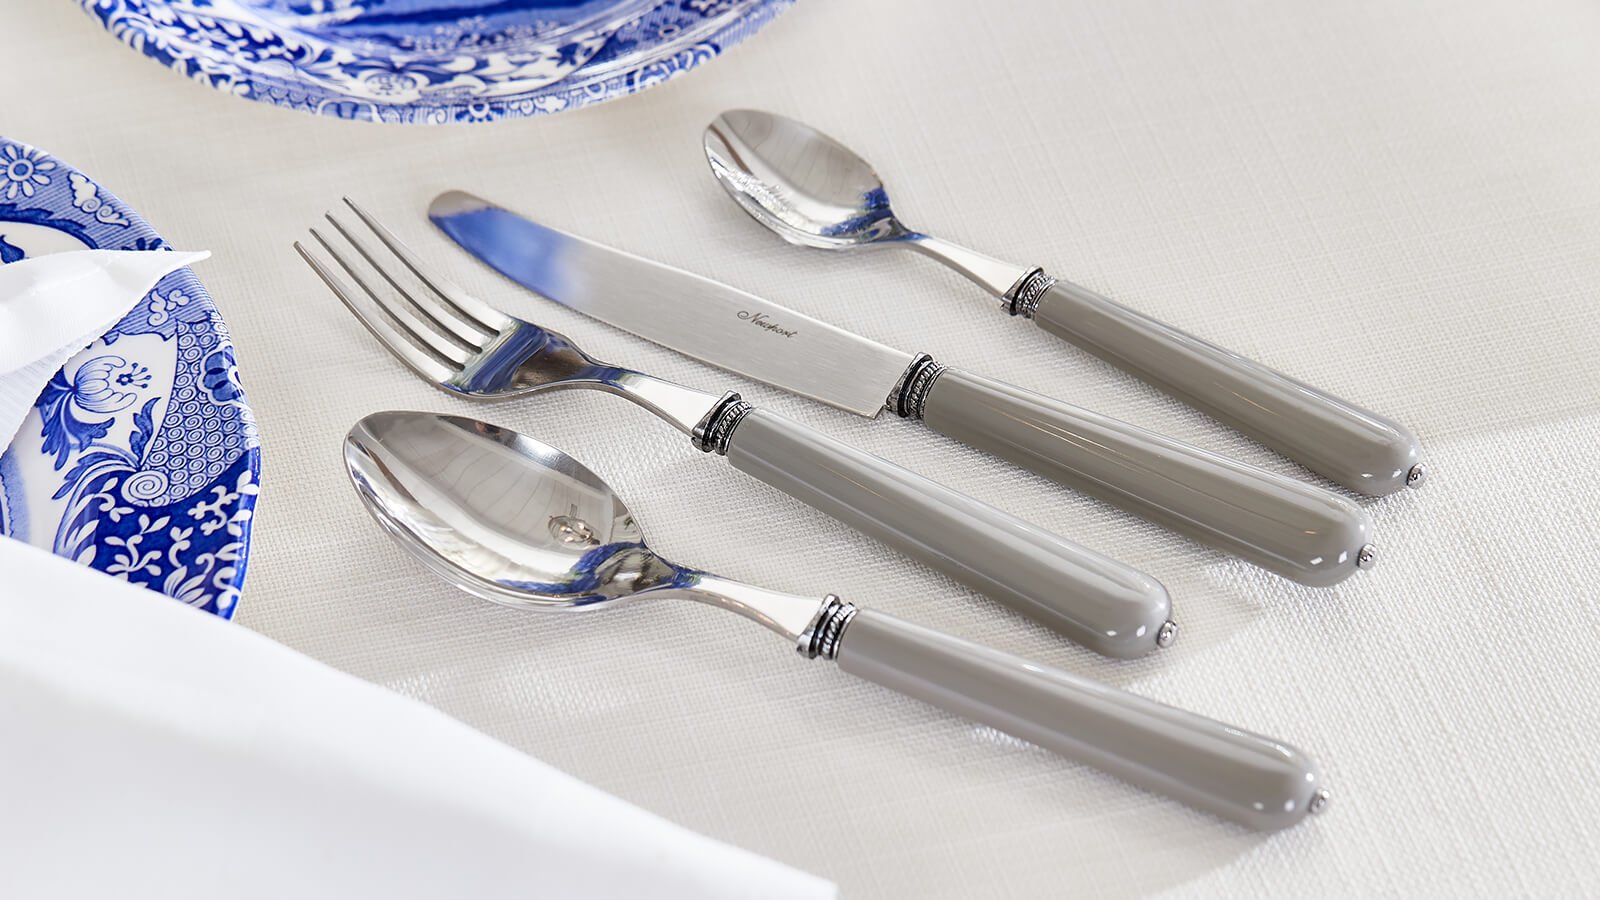 Cutlery | Classic cutlery and cutlery sets online